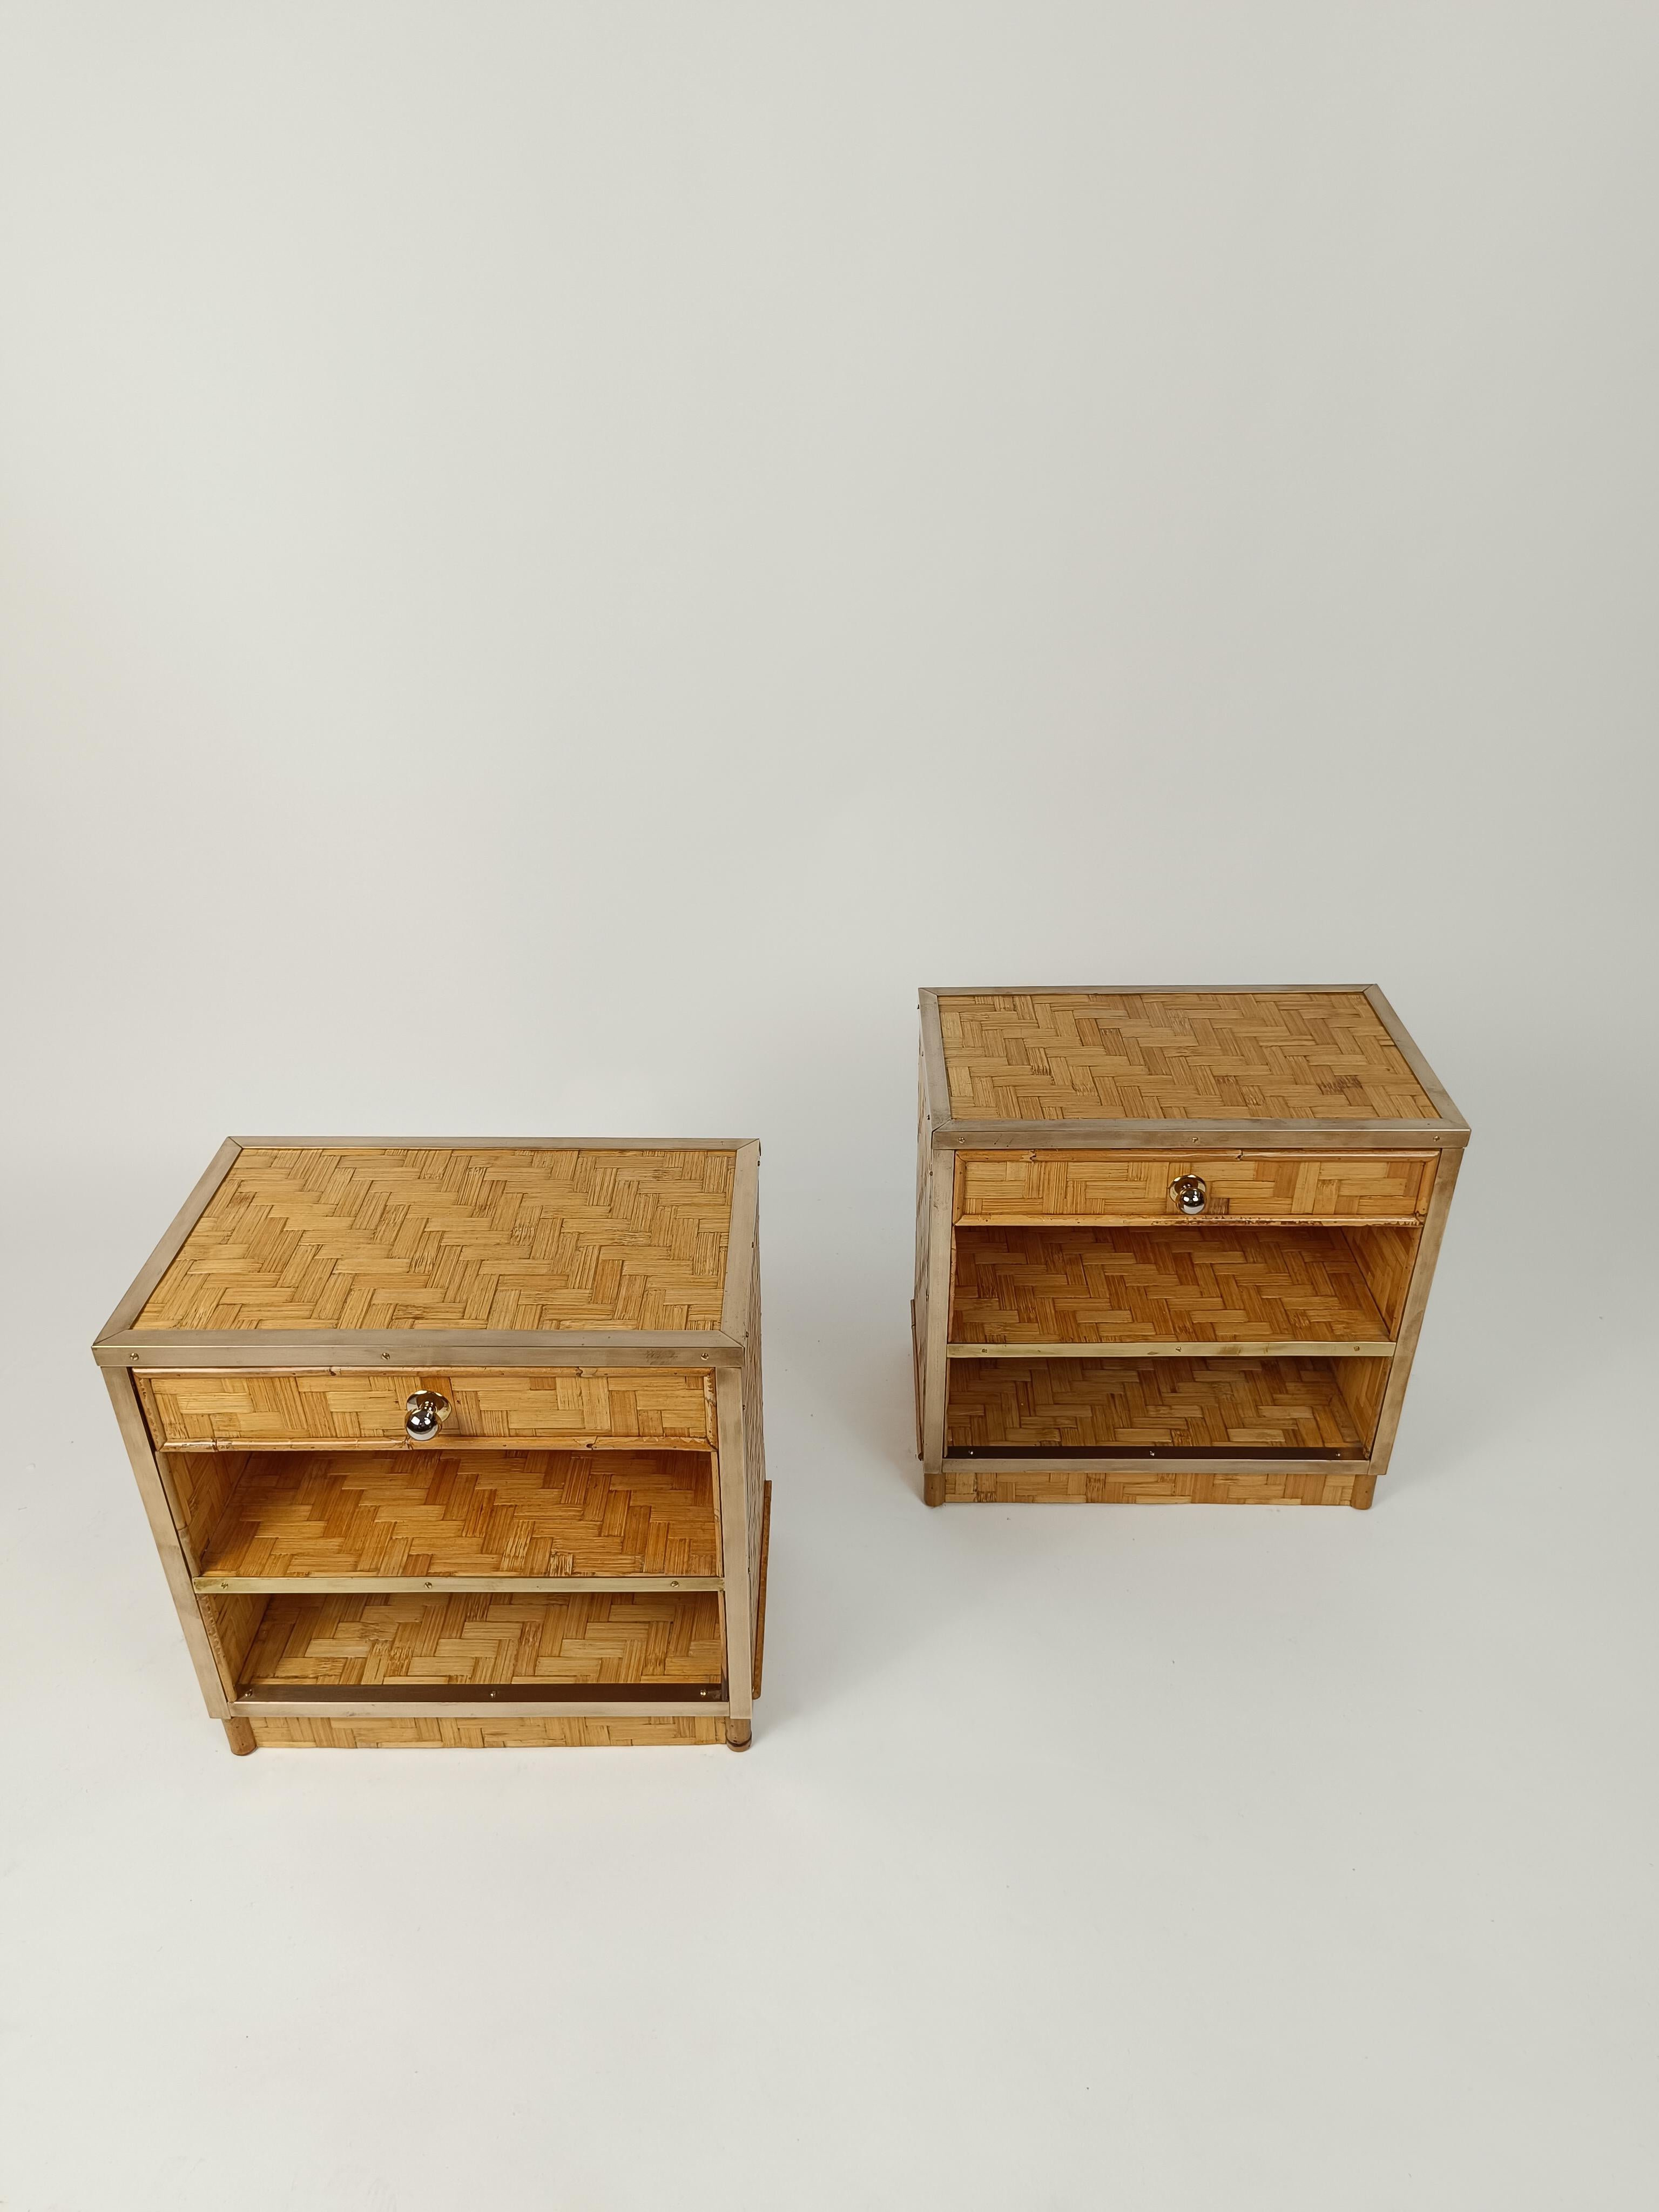 20th Century Midcentury Italian Bedside Tables in Bamboo Cane, Rattan and Brass, 1970s For Sale